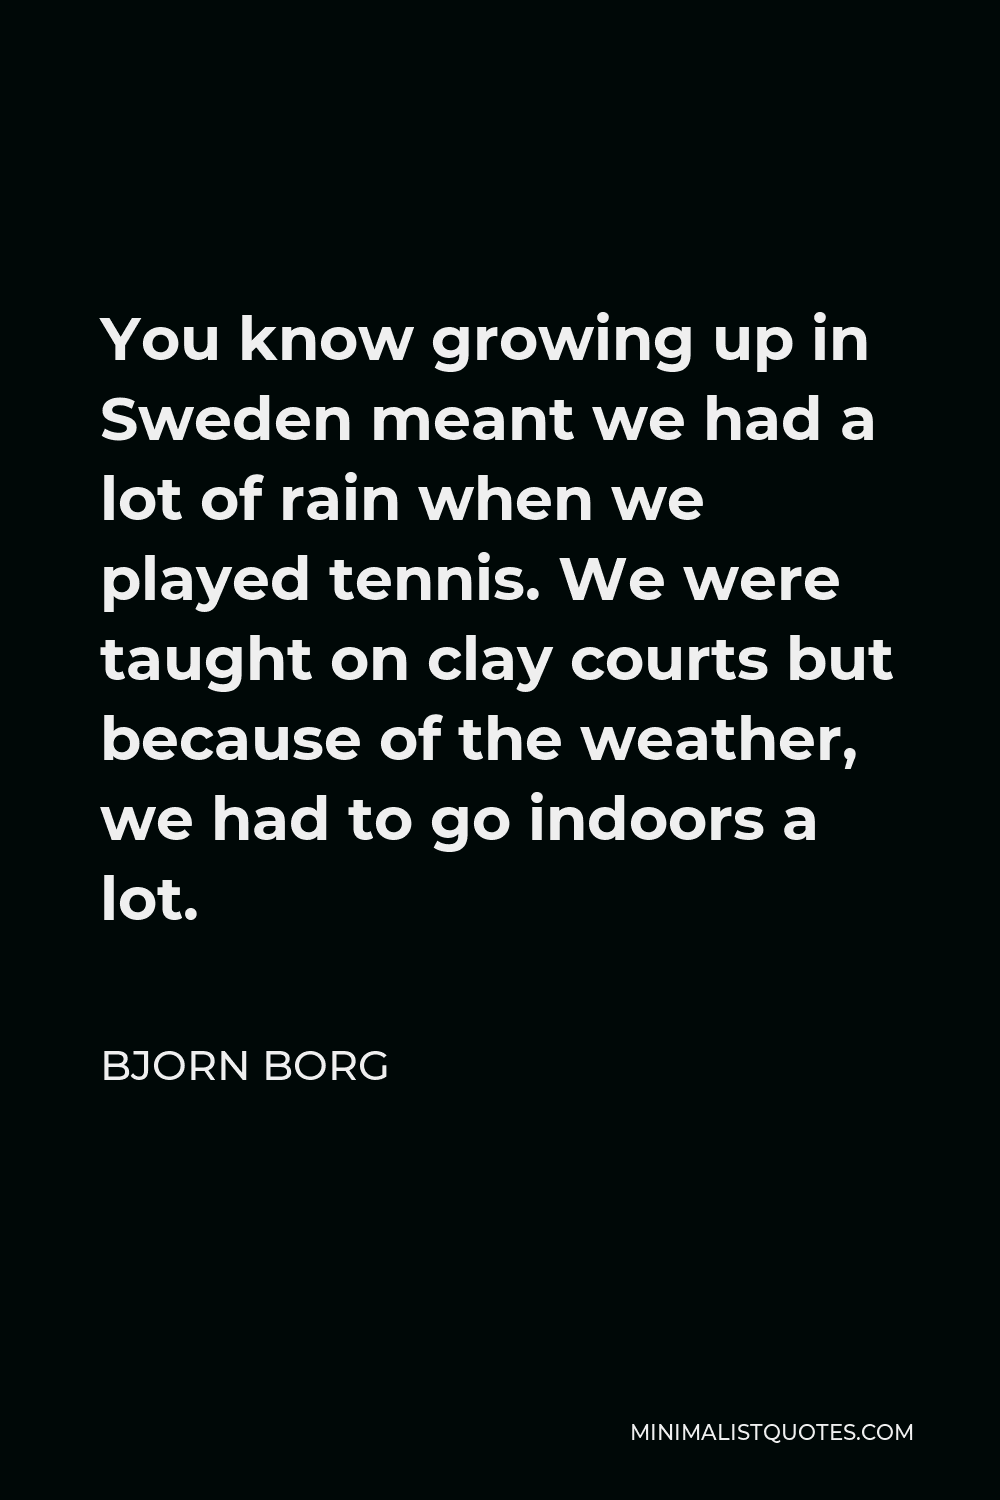 Bjorn Borg Quote - You know growing up in Sweden meant we had a lot of rain when we played tennis. We were taught on clay courts but because of the weather, we had to go indoors a lot.